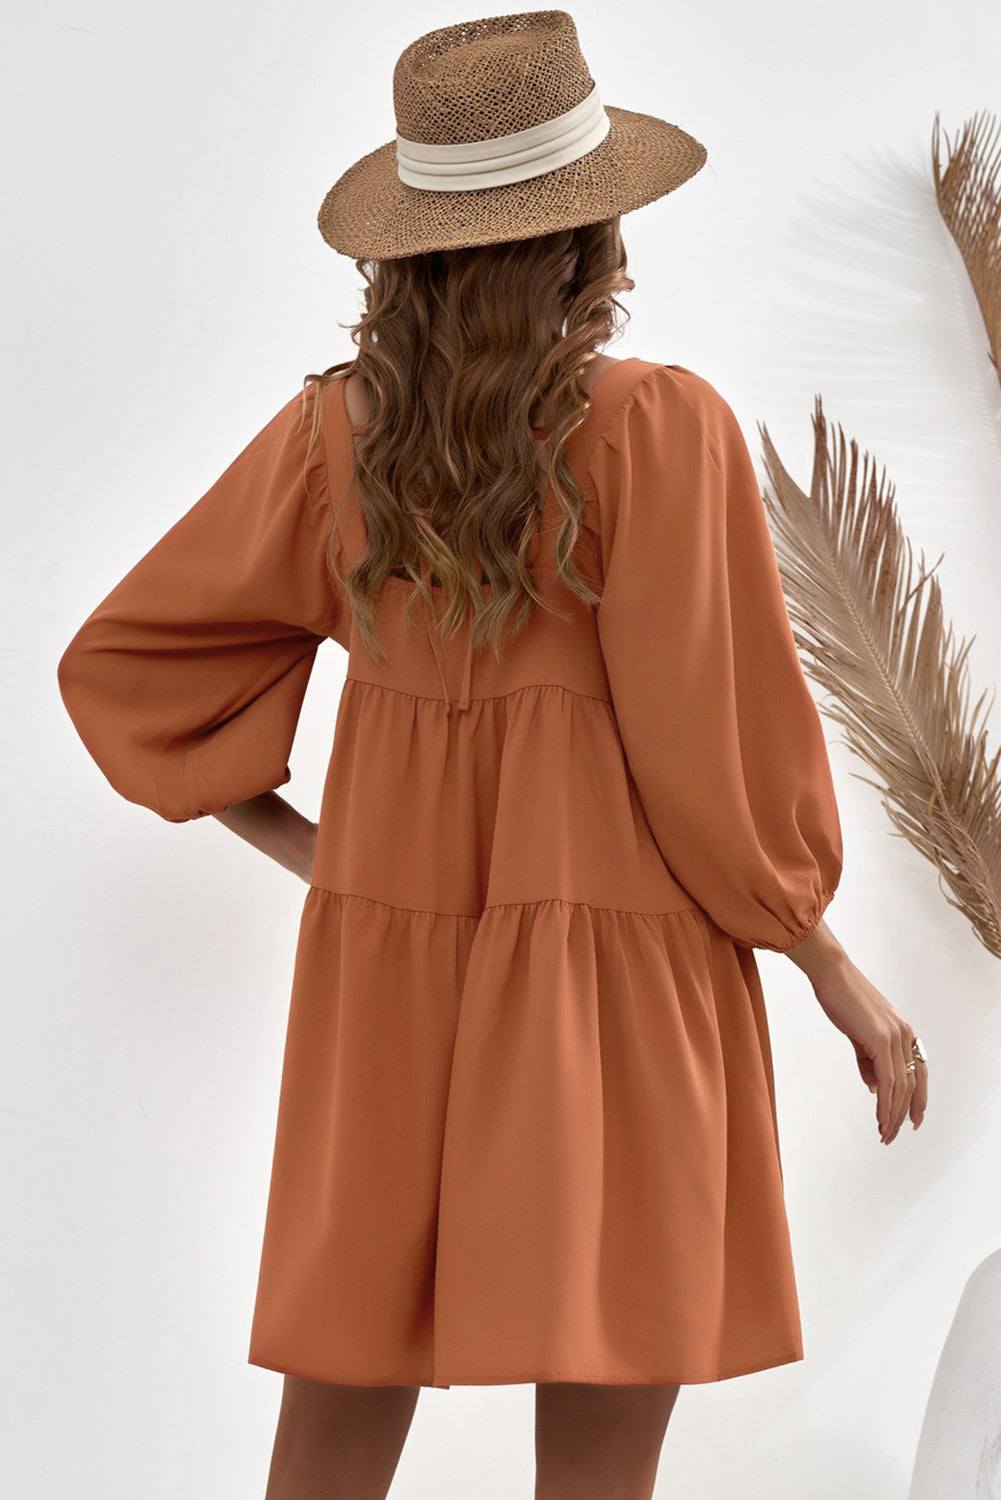 Square Neck Tie Back Tiered Dress